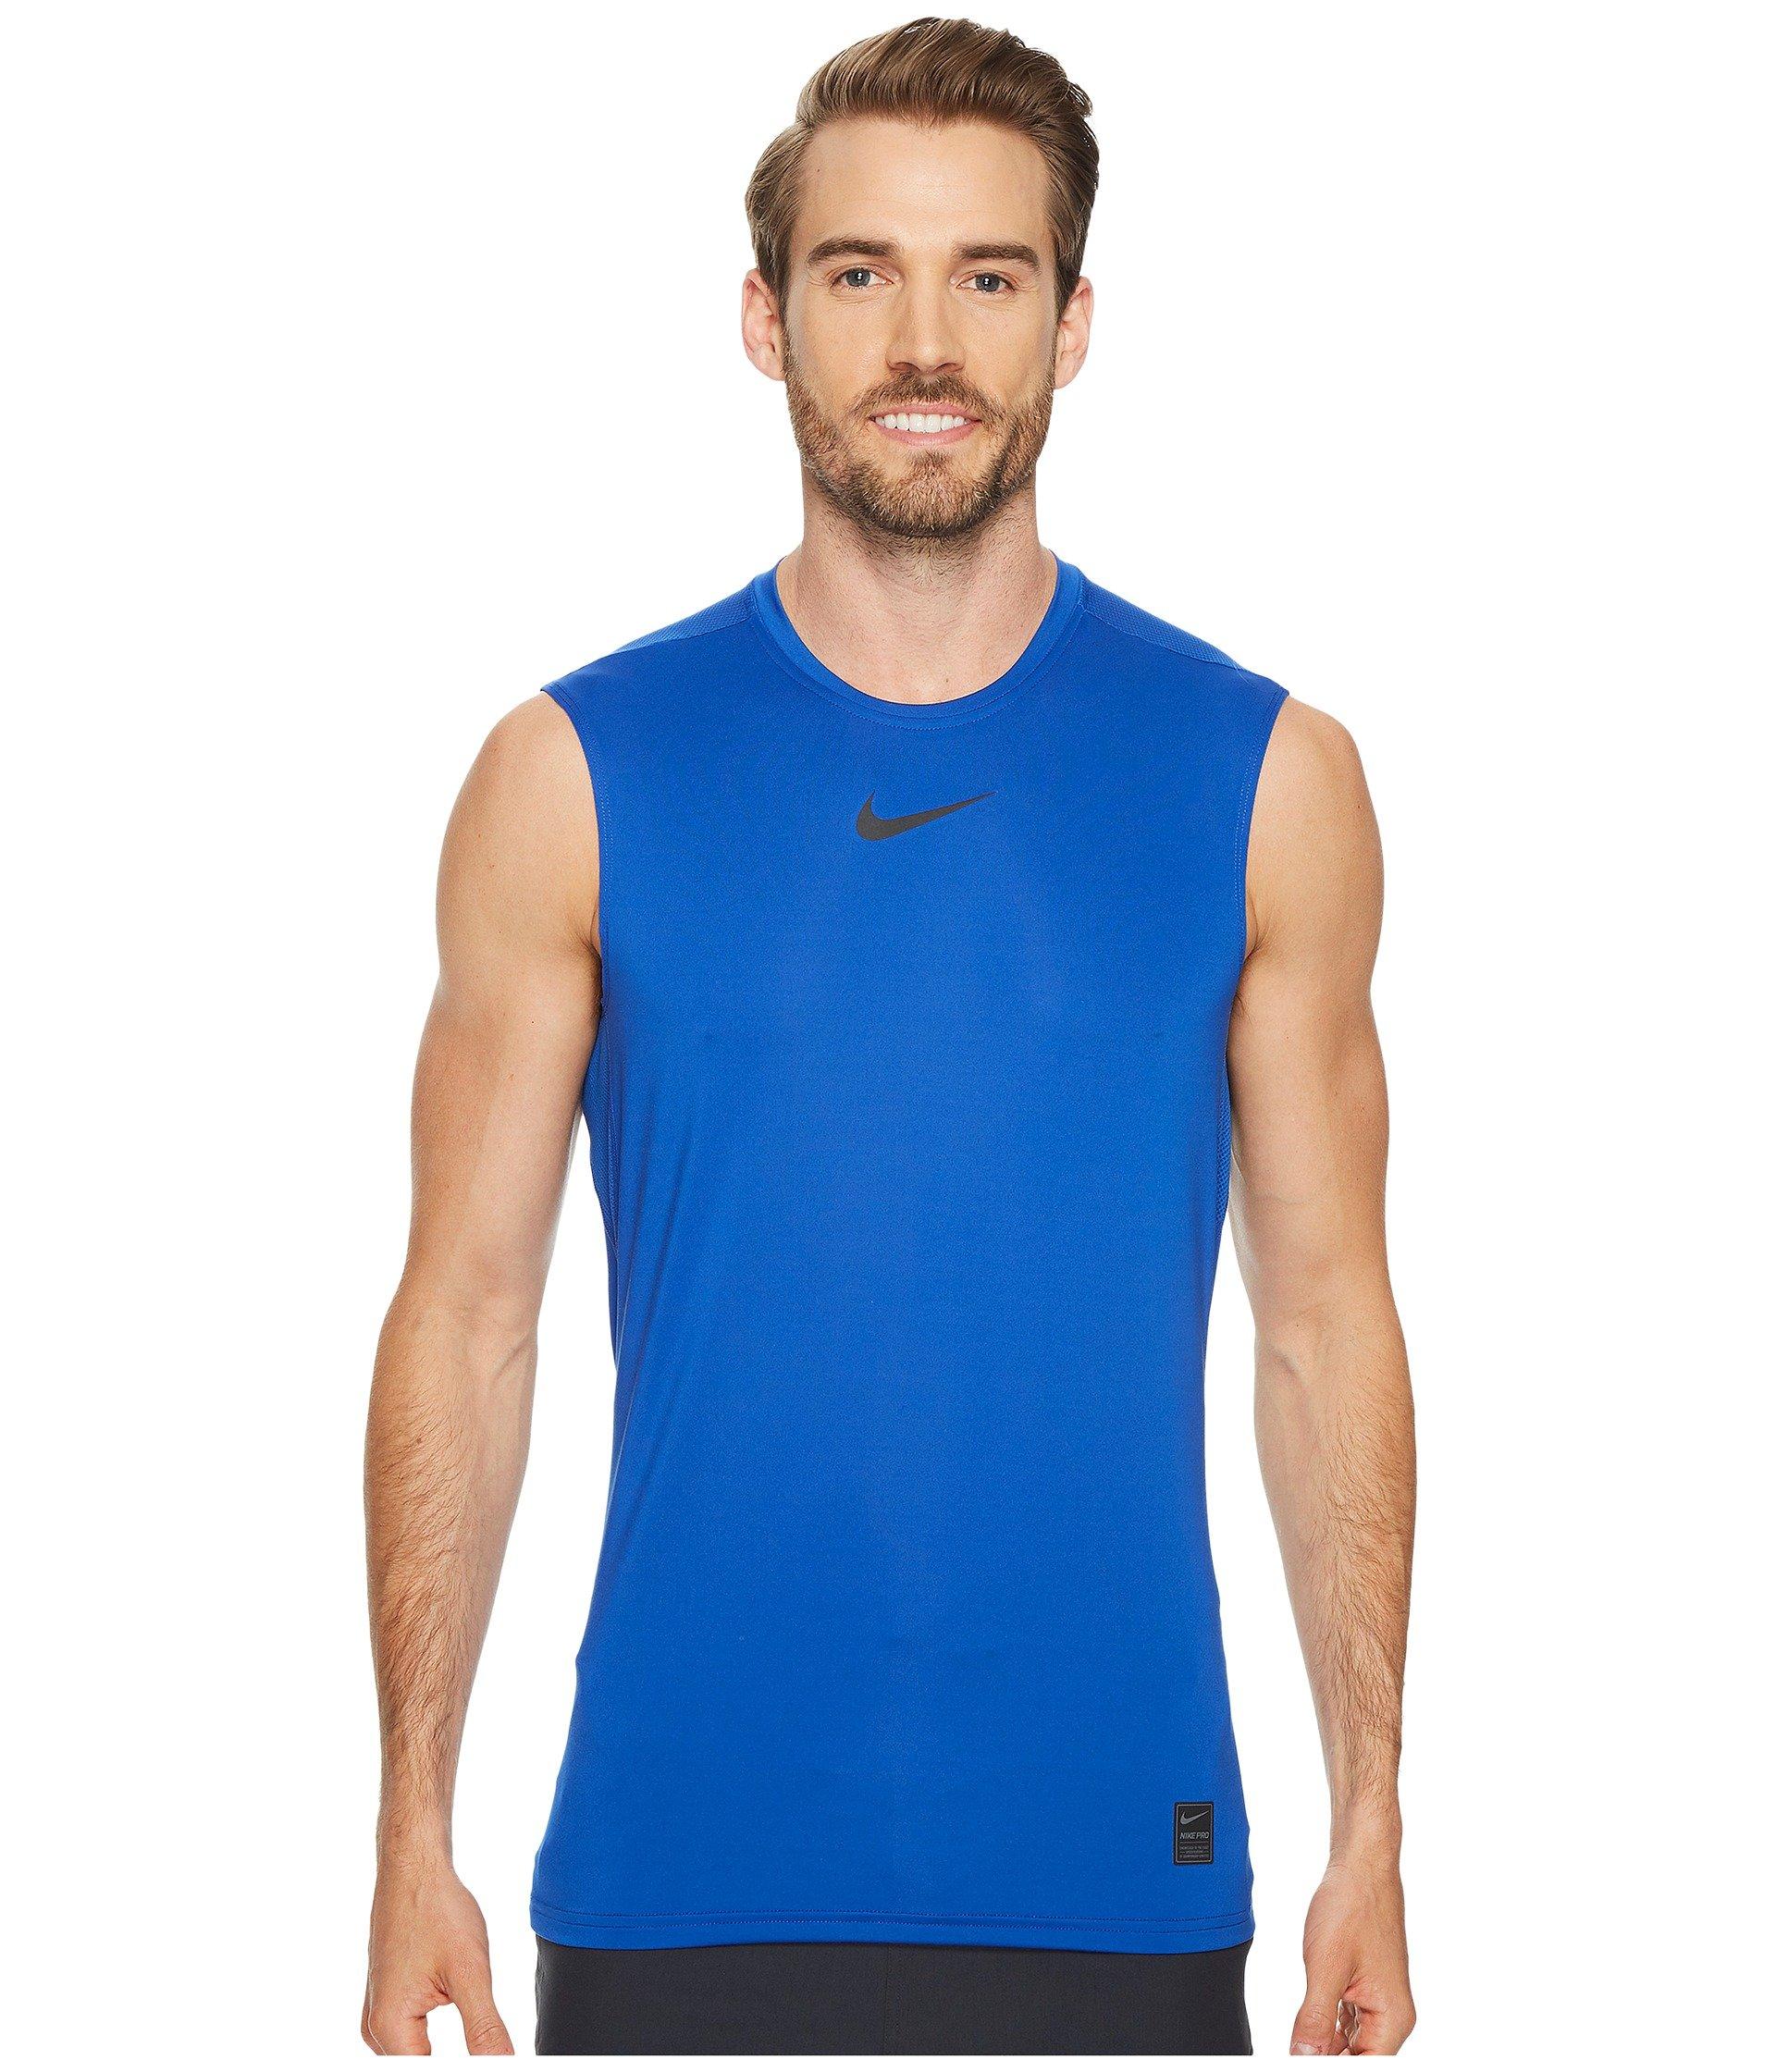 Nike Synthetic Pro Fitted Sleeveless Training Top in Blue for Men - Lyst